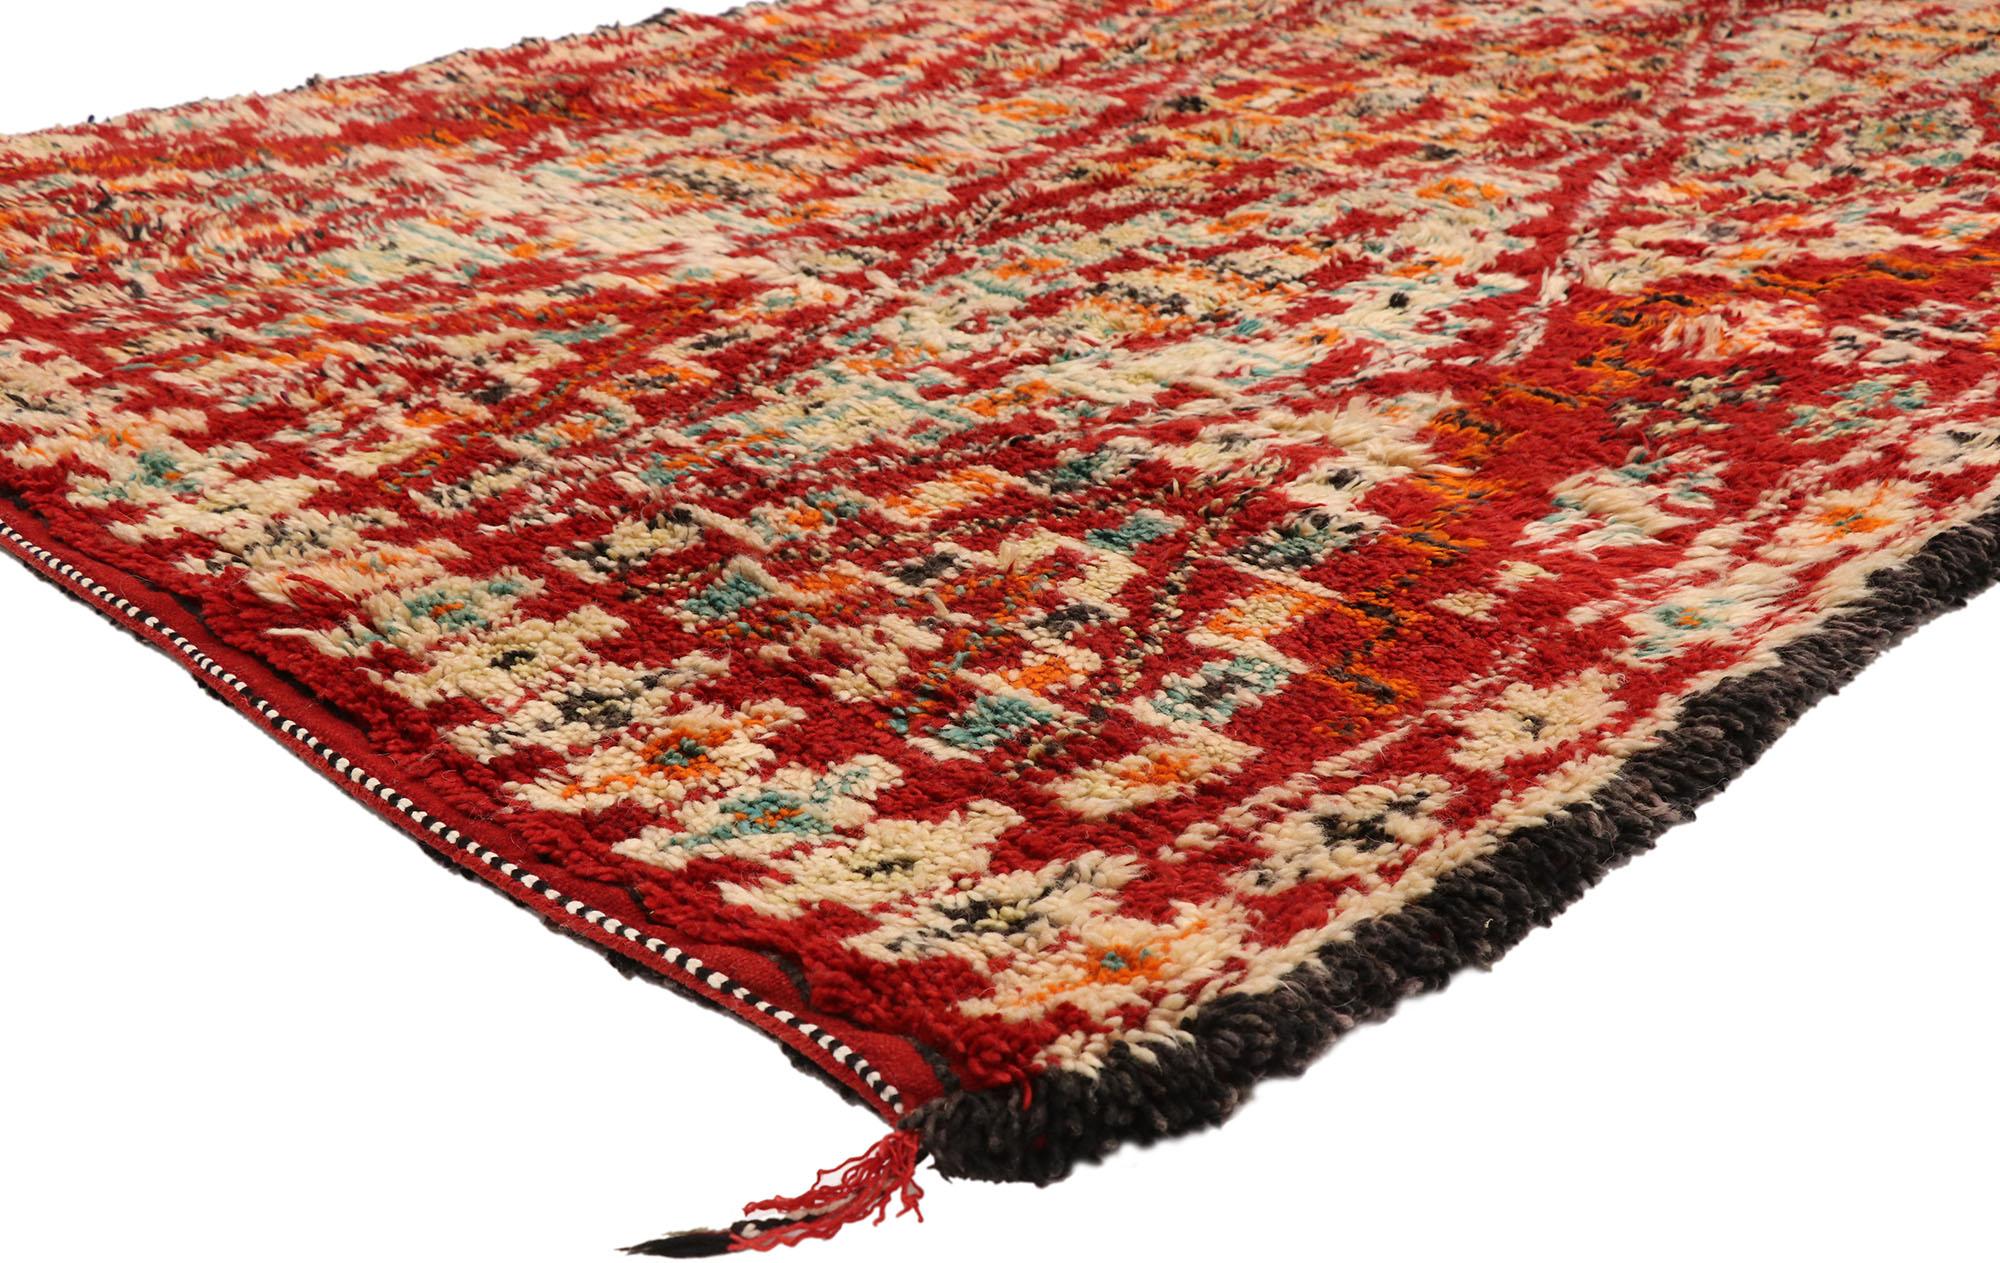 20941, vintage Beni M'Guild Moroccan rug with Modern Northwestern style. With its bold hues and beguiling beauty, this hand knotted wool vintage Beni M'Guild Moroccan rug is a vibrant cultural artifact of the 1960s beautifully highlighting tribal